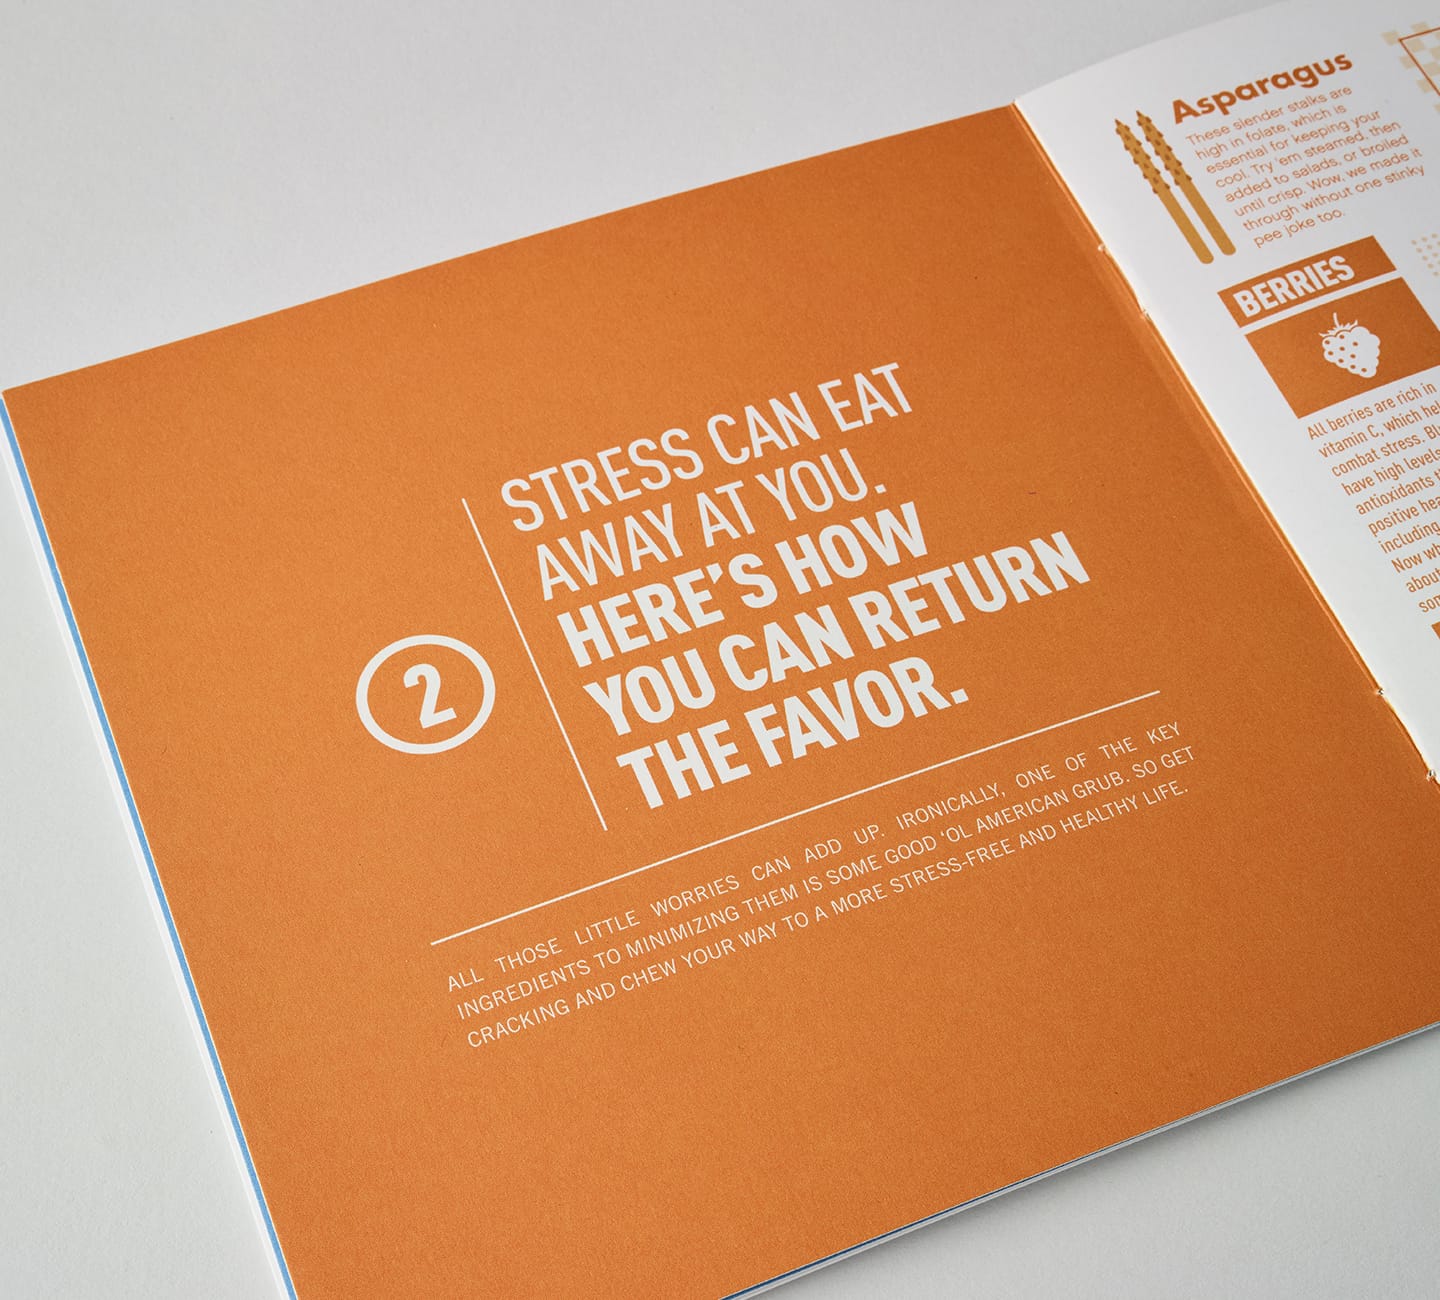 stressipies booklet for kfb law eating stress